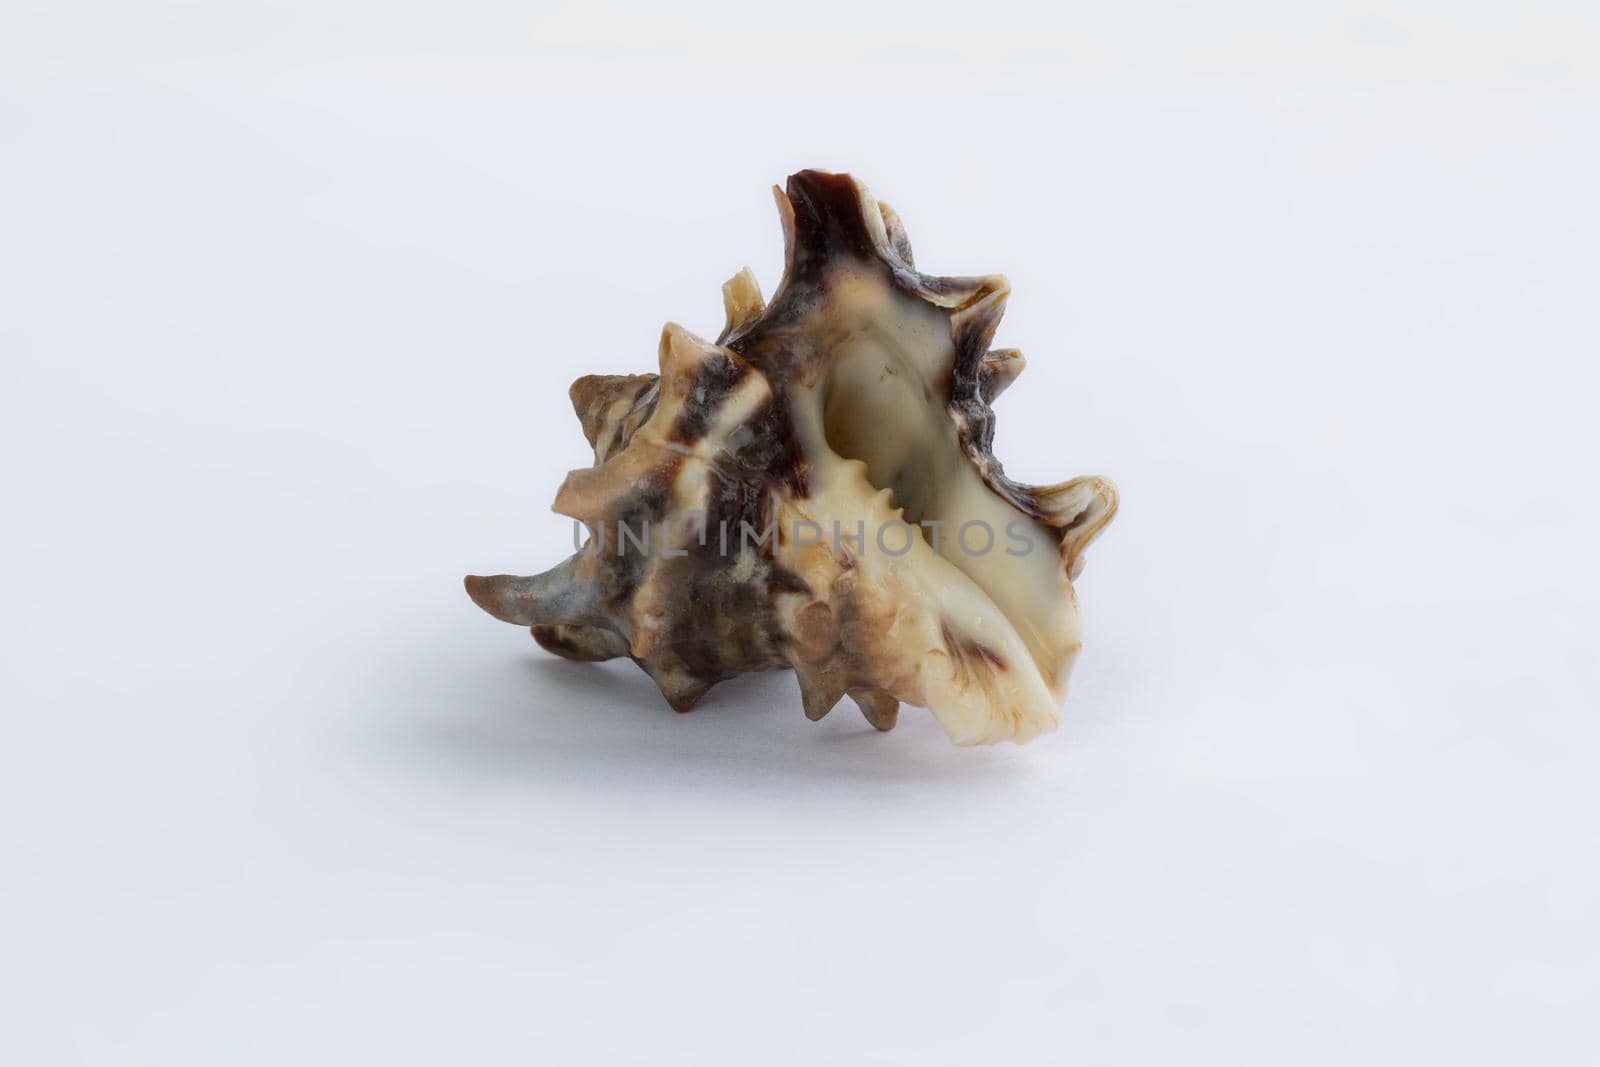 Marine life: brown spiny gastropod seashell close-up on white background by VeraVerano